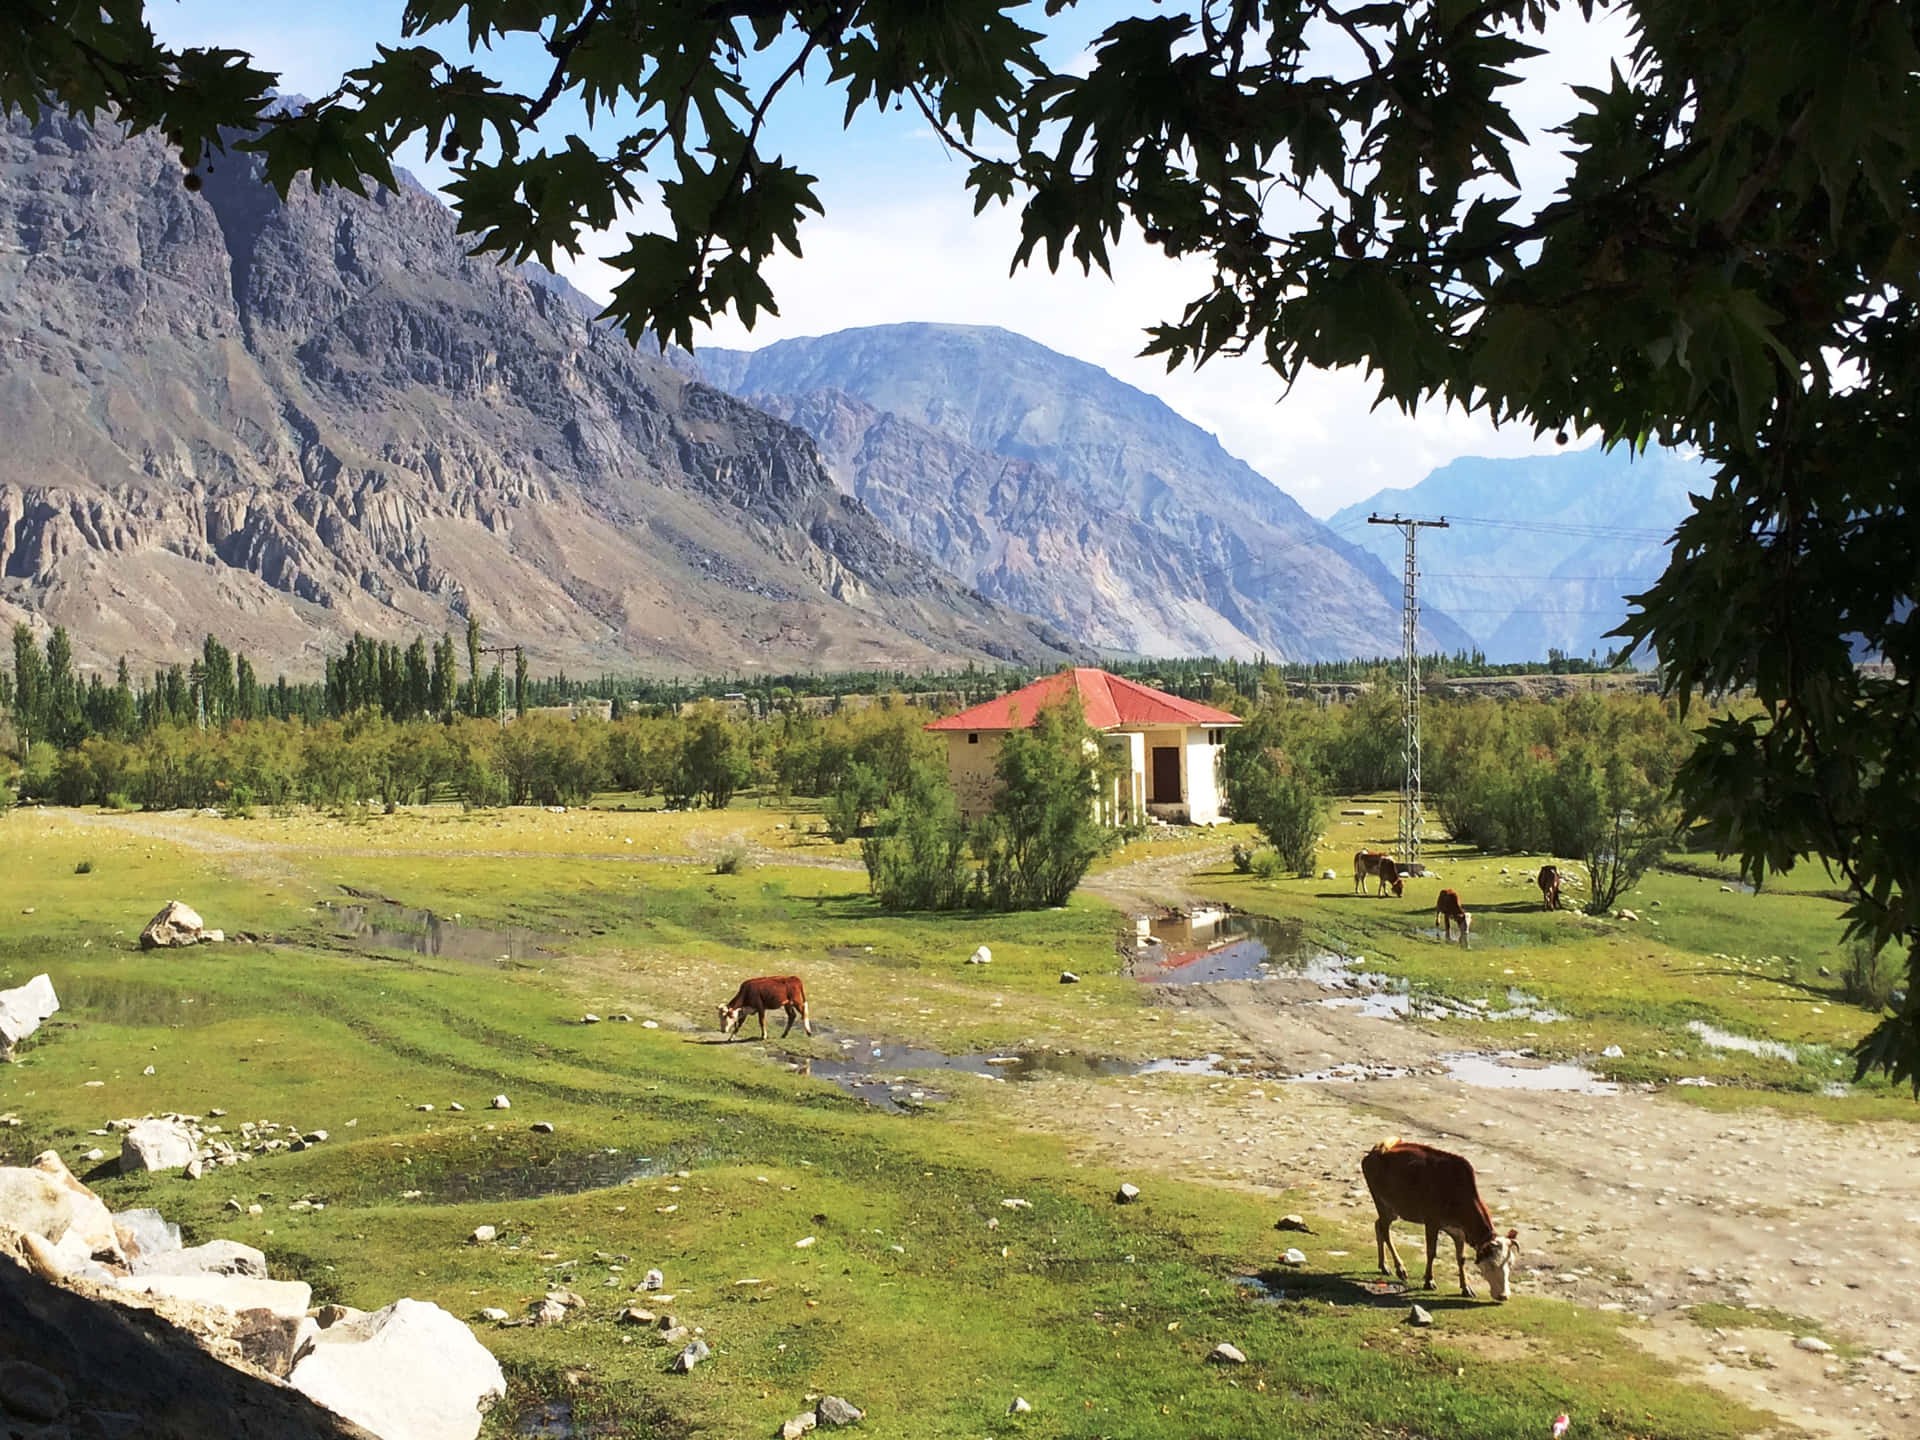 Feel the Calm of Nature in This Himalayan Valley